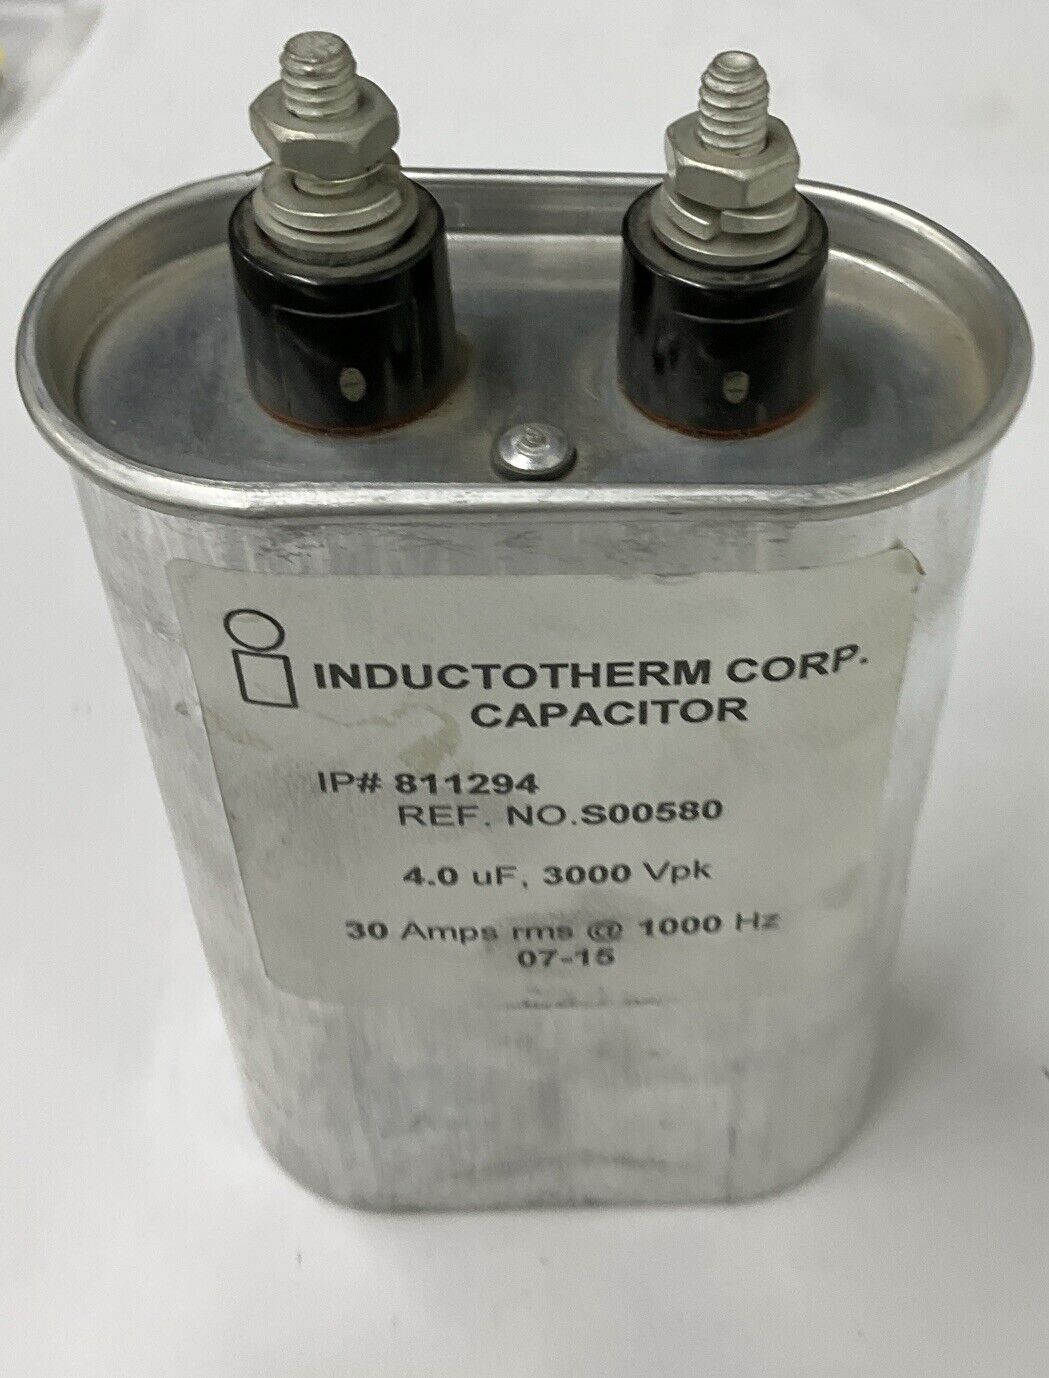 Inductotherm Corp. IP#811294 Capacitor 4.0 µF 3000 VPK (BL203)